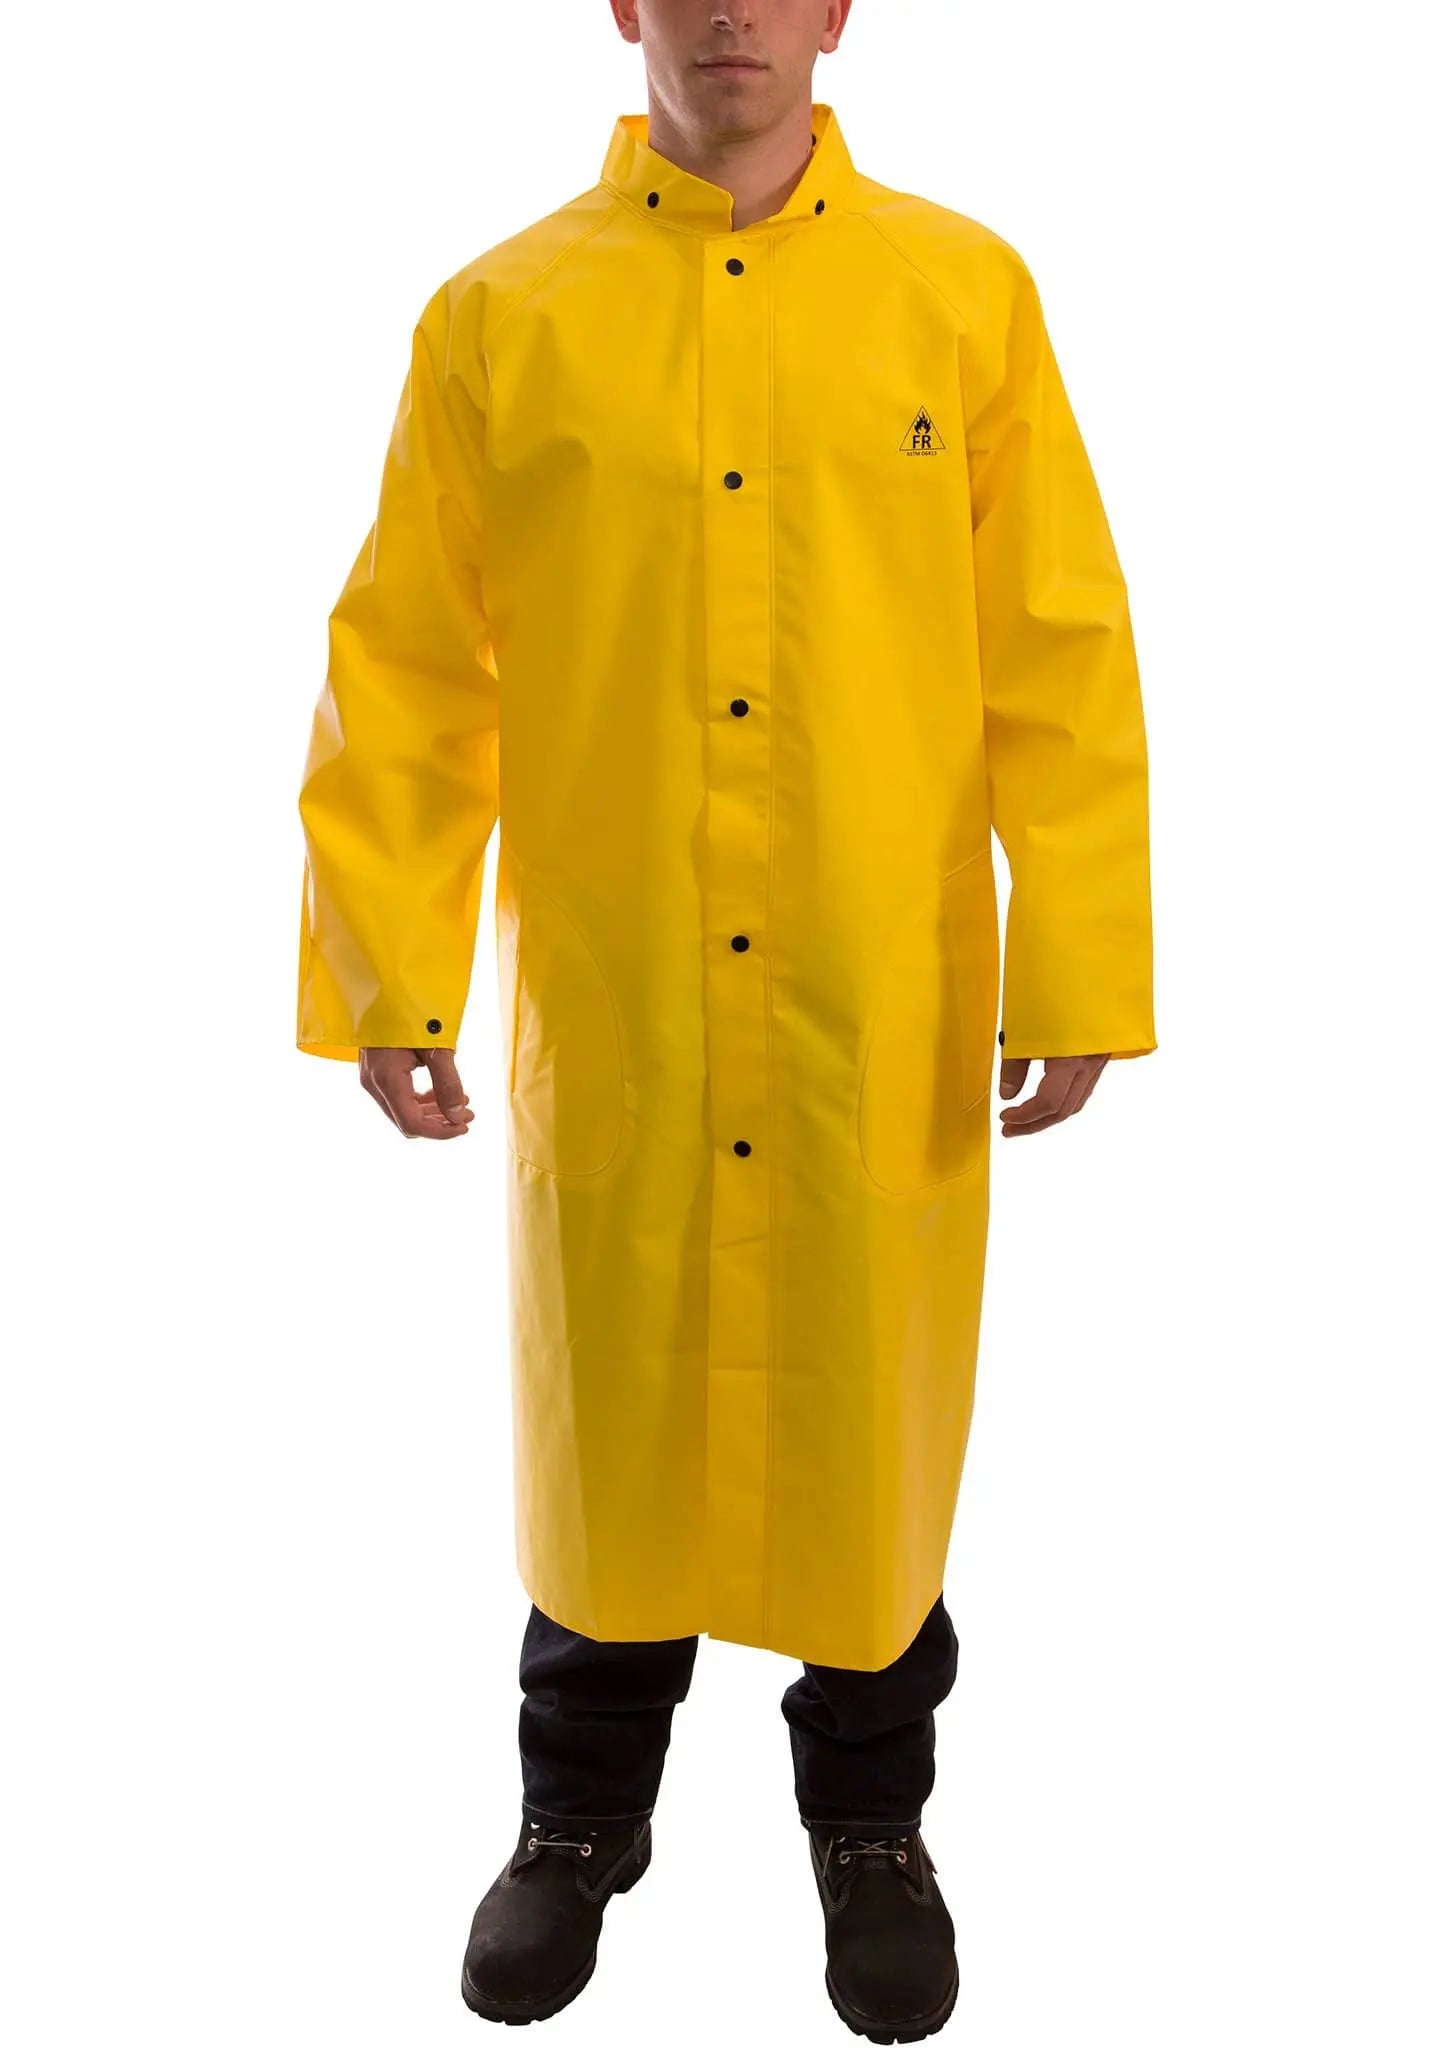 TINGLEY - FR 48" DuraScrim Coat Yellow - Becker Safety and Supply